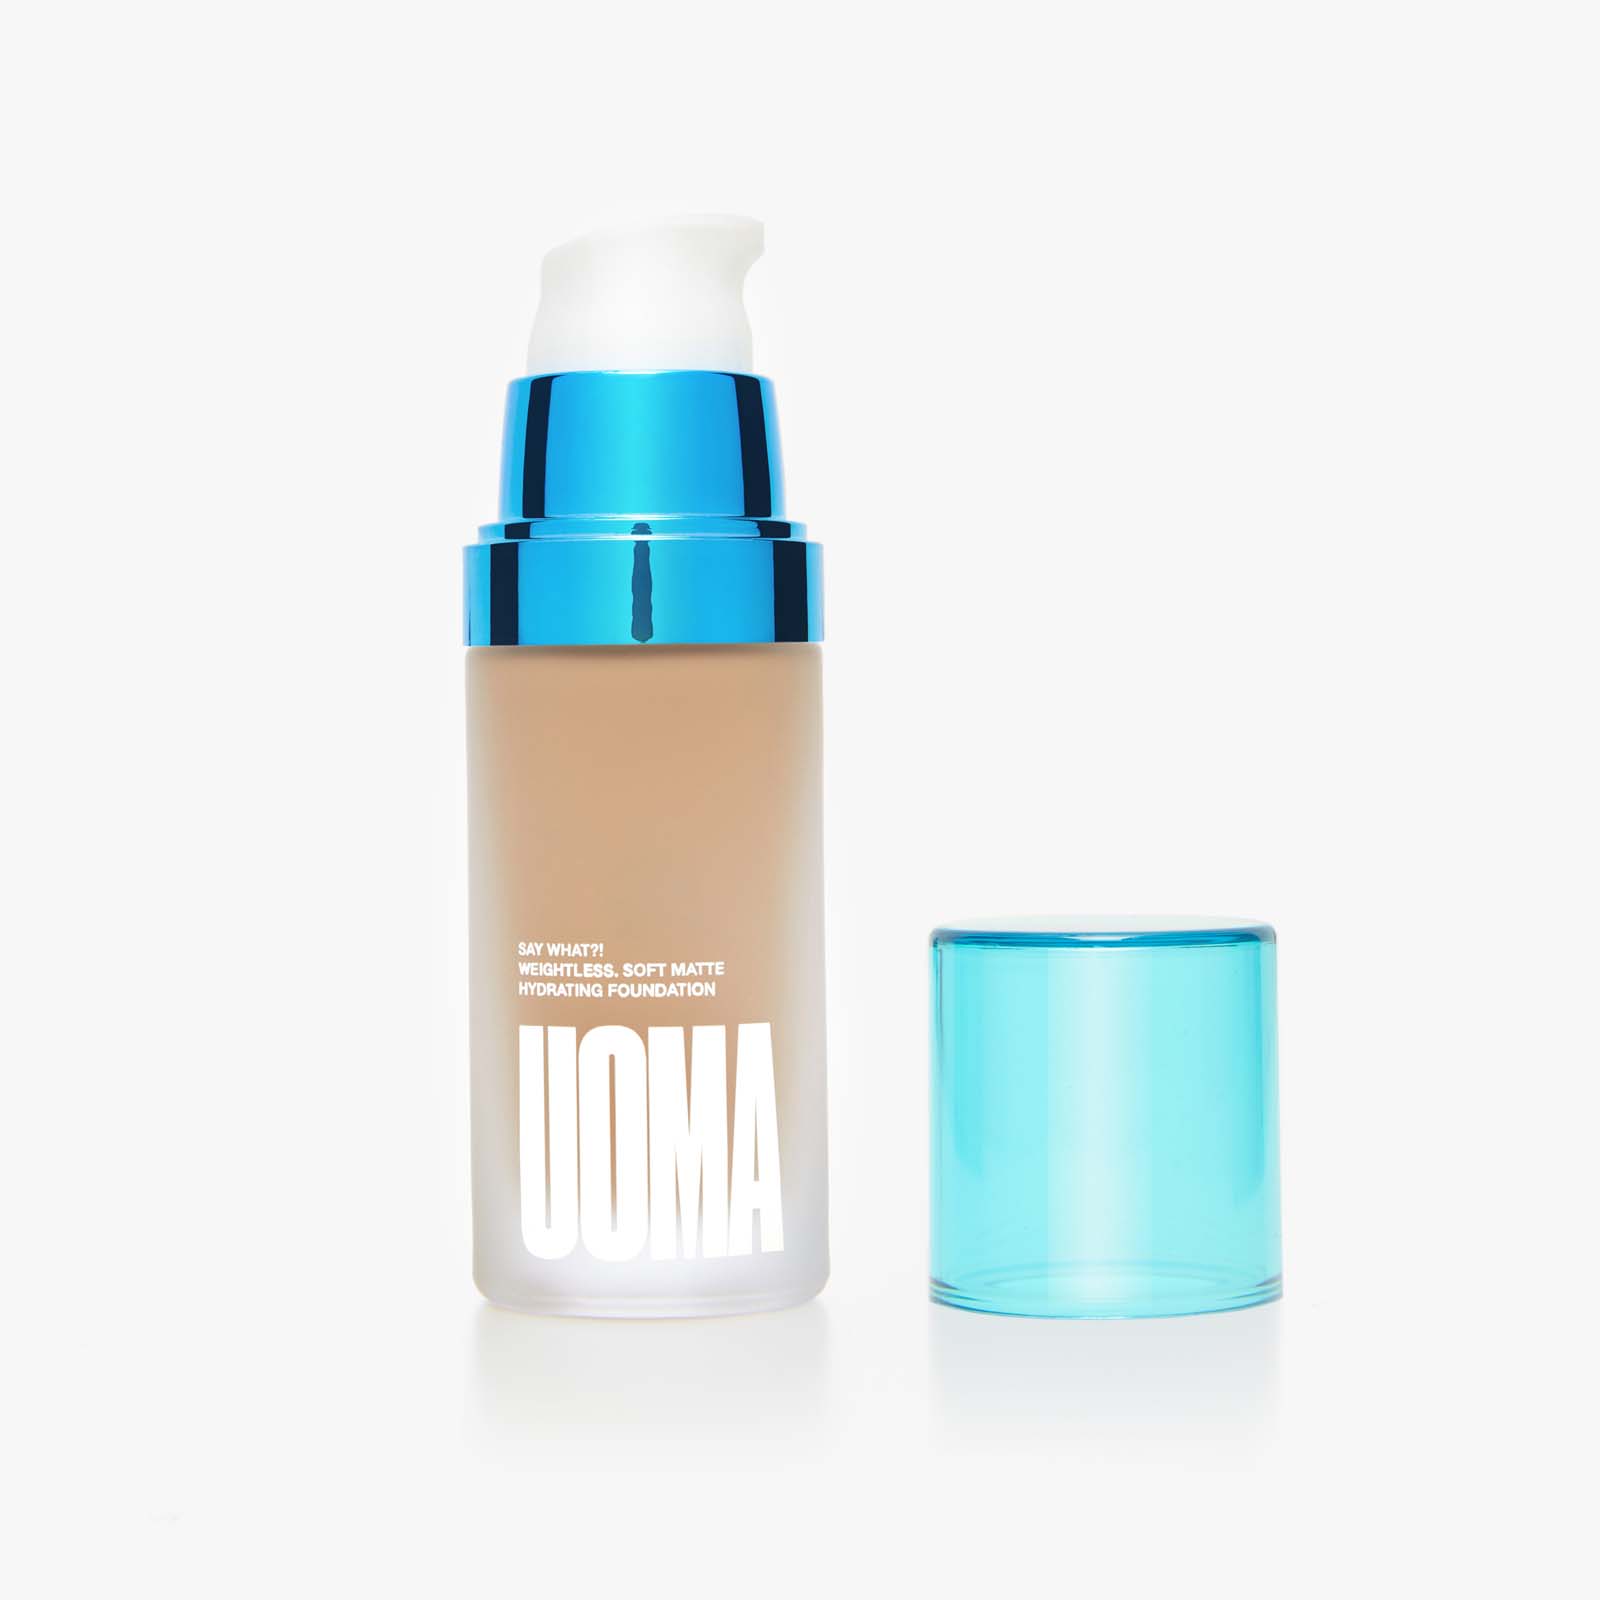 Uoma Beauty Say What?! Weightless Soft Matte Hydrating Foundation 30Ml Fair Lady T2N